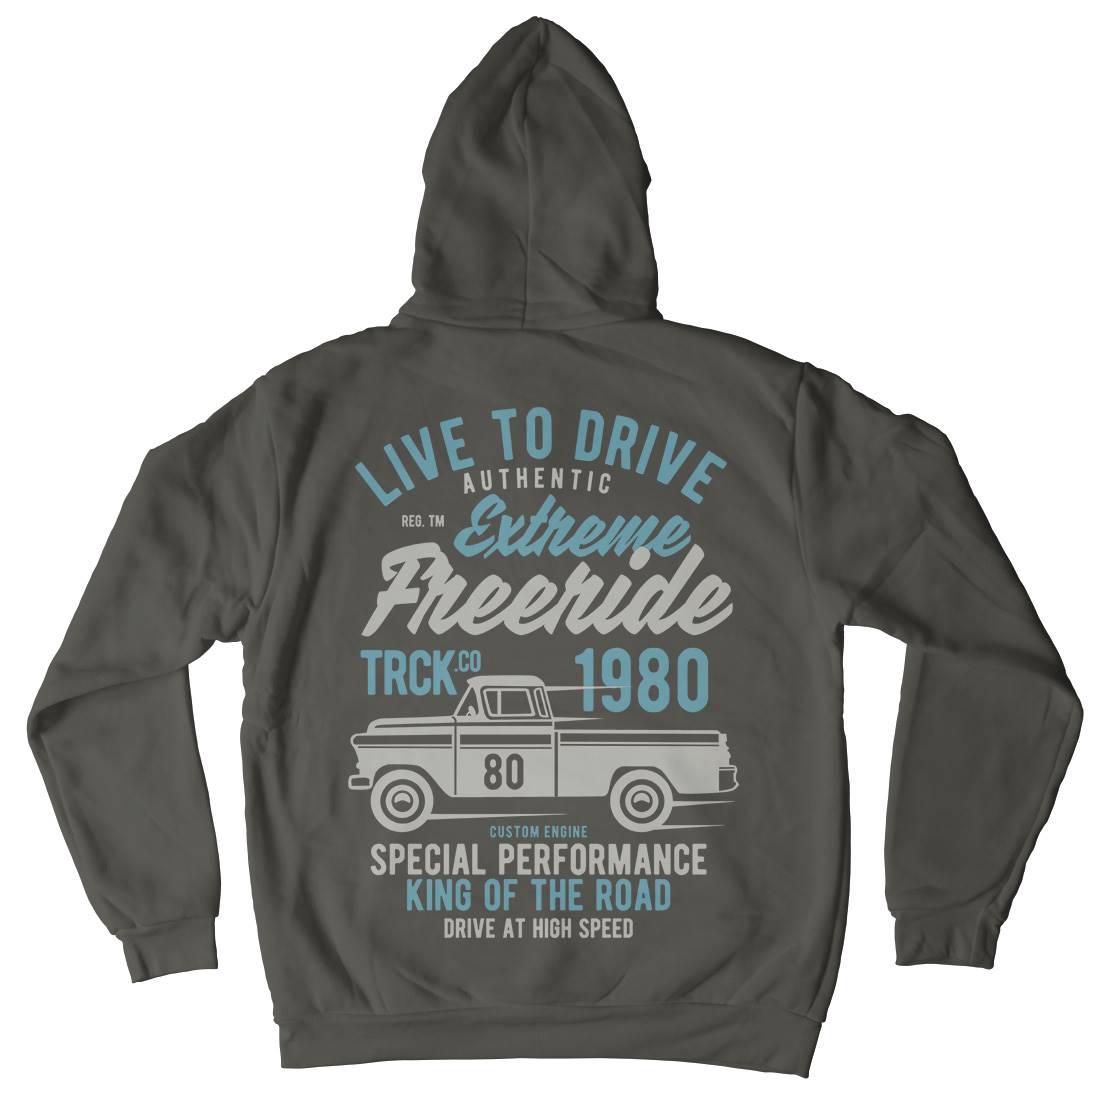 Extreme Freeride Truck Mens Hoodie With Pocket Cars B401